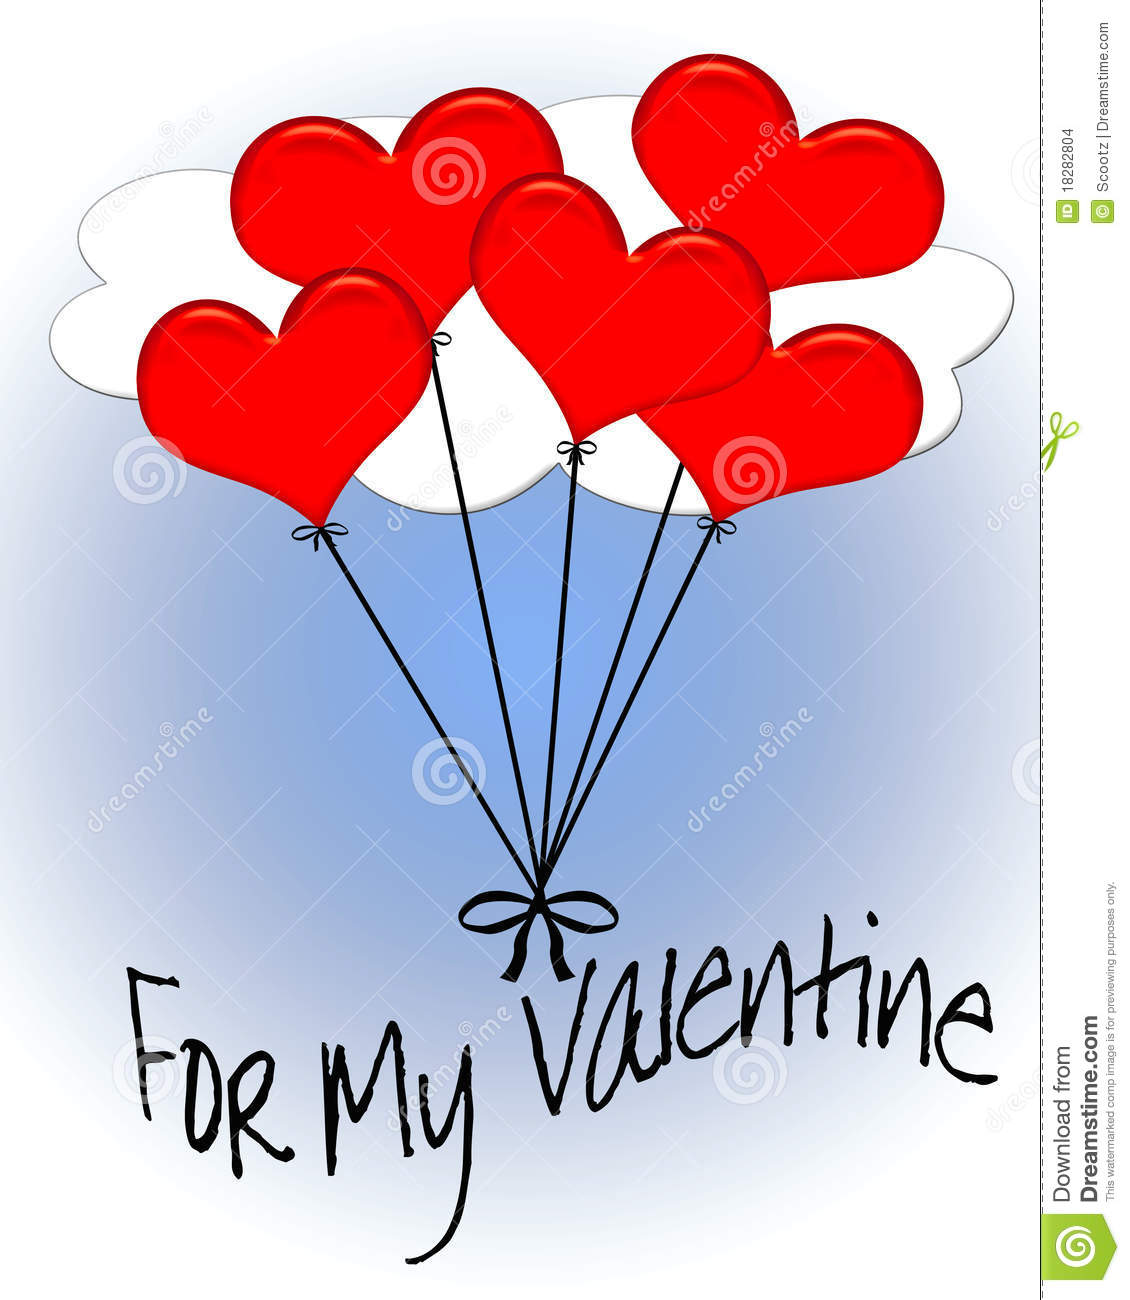 More Similar Stock Images Of   Heart Balloons Bouquet  